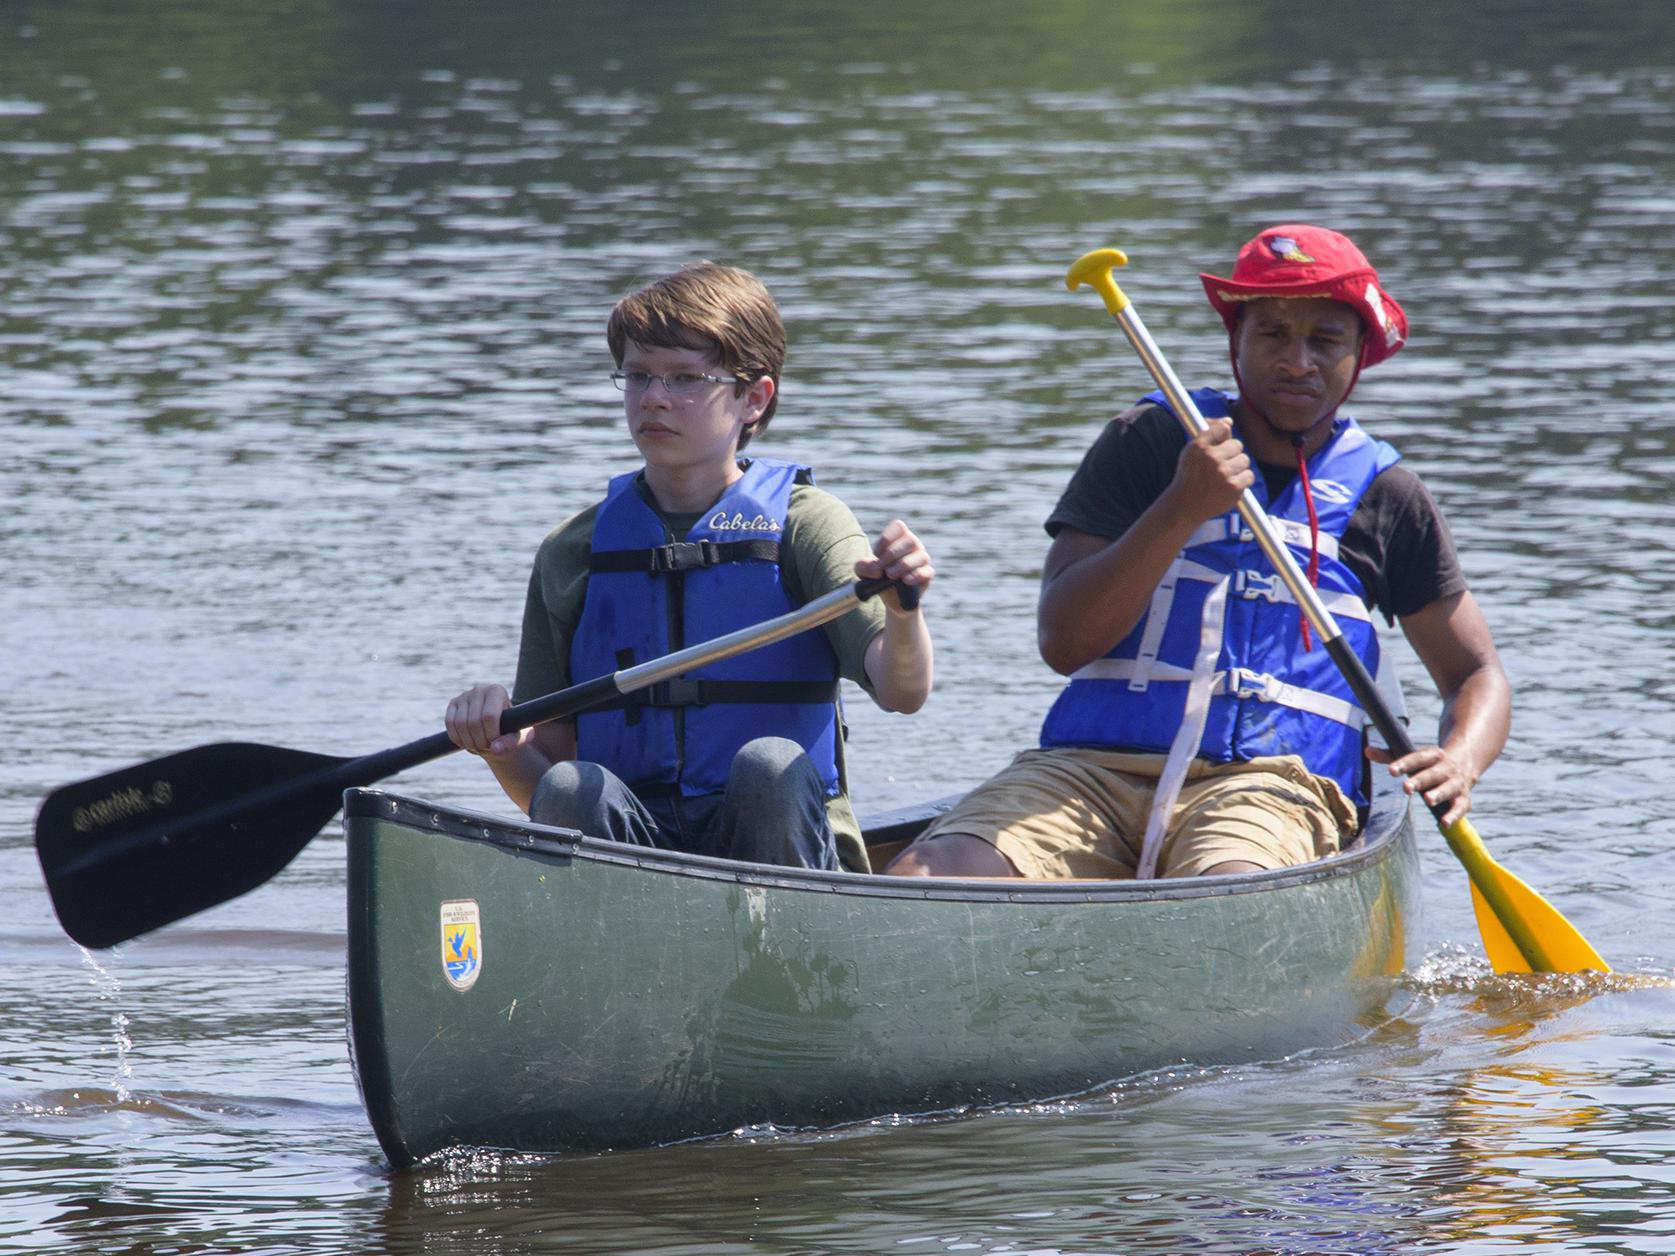 Young campers paddle across a lake during a Mississippi State University conservation camp in 2015. (Photo by MSU Extension Service/Kevin Hudson)